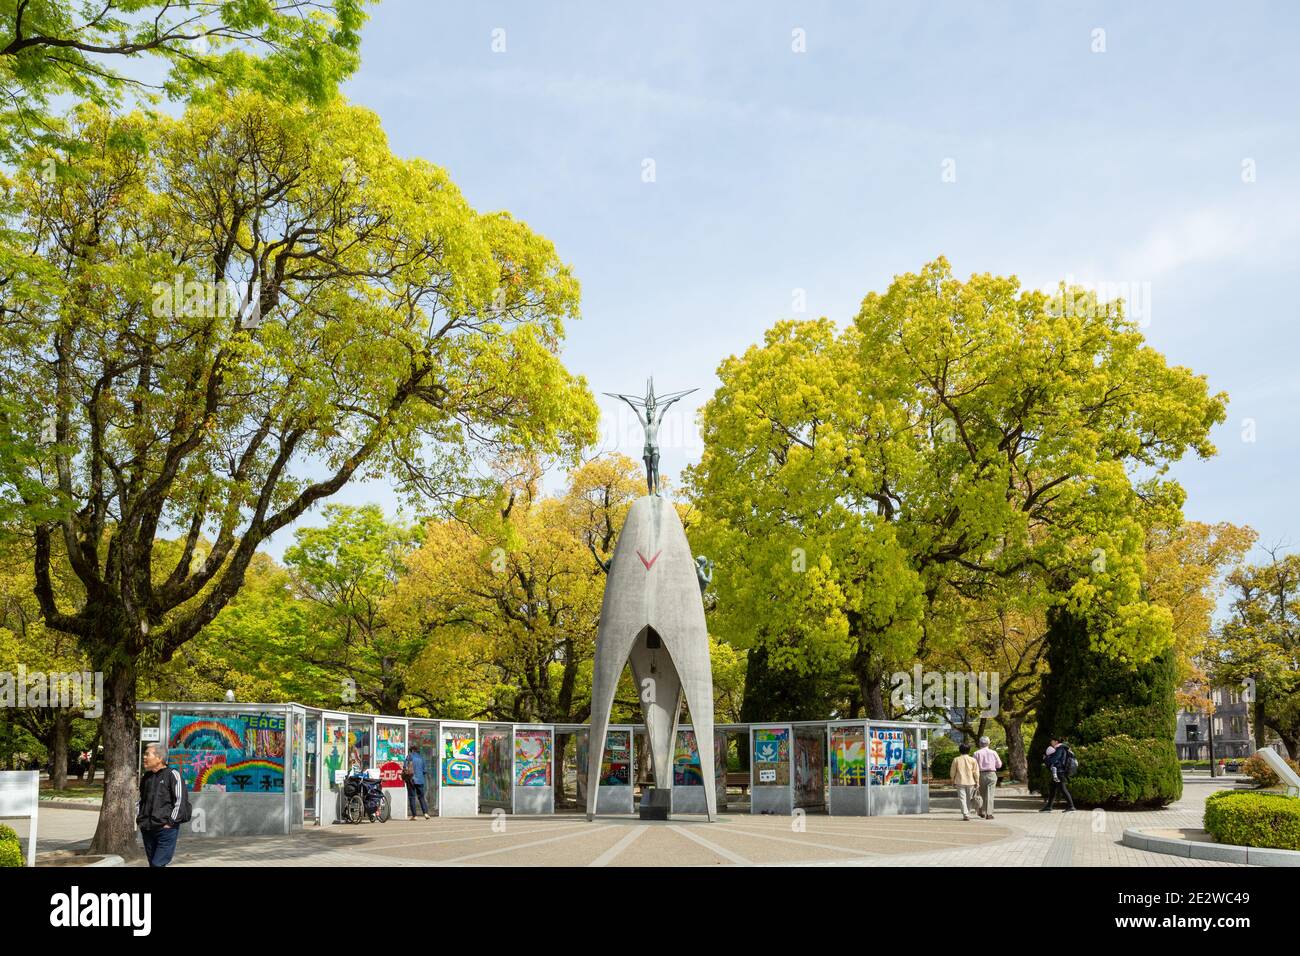 Children's Peace Monument, with boards showing paper cranes below, and trees around, Hiroshima, Japan. Stock Photo